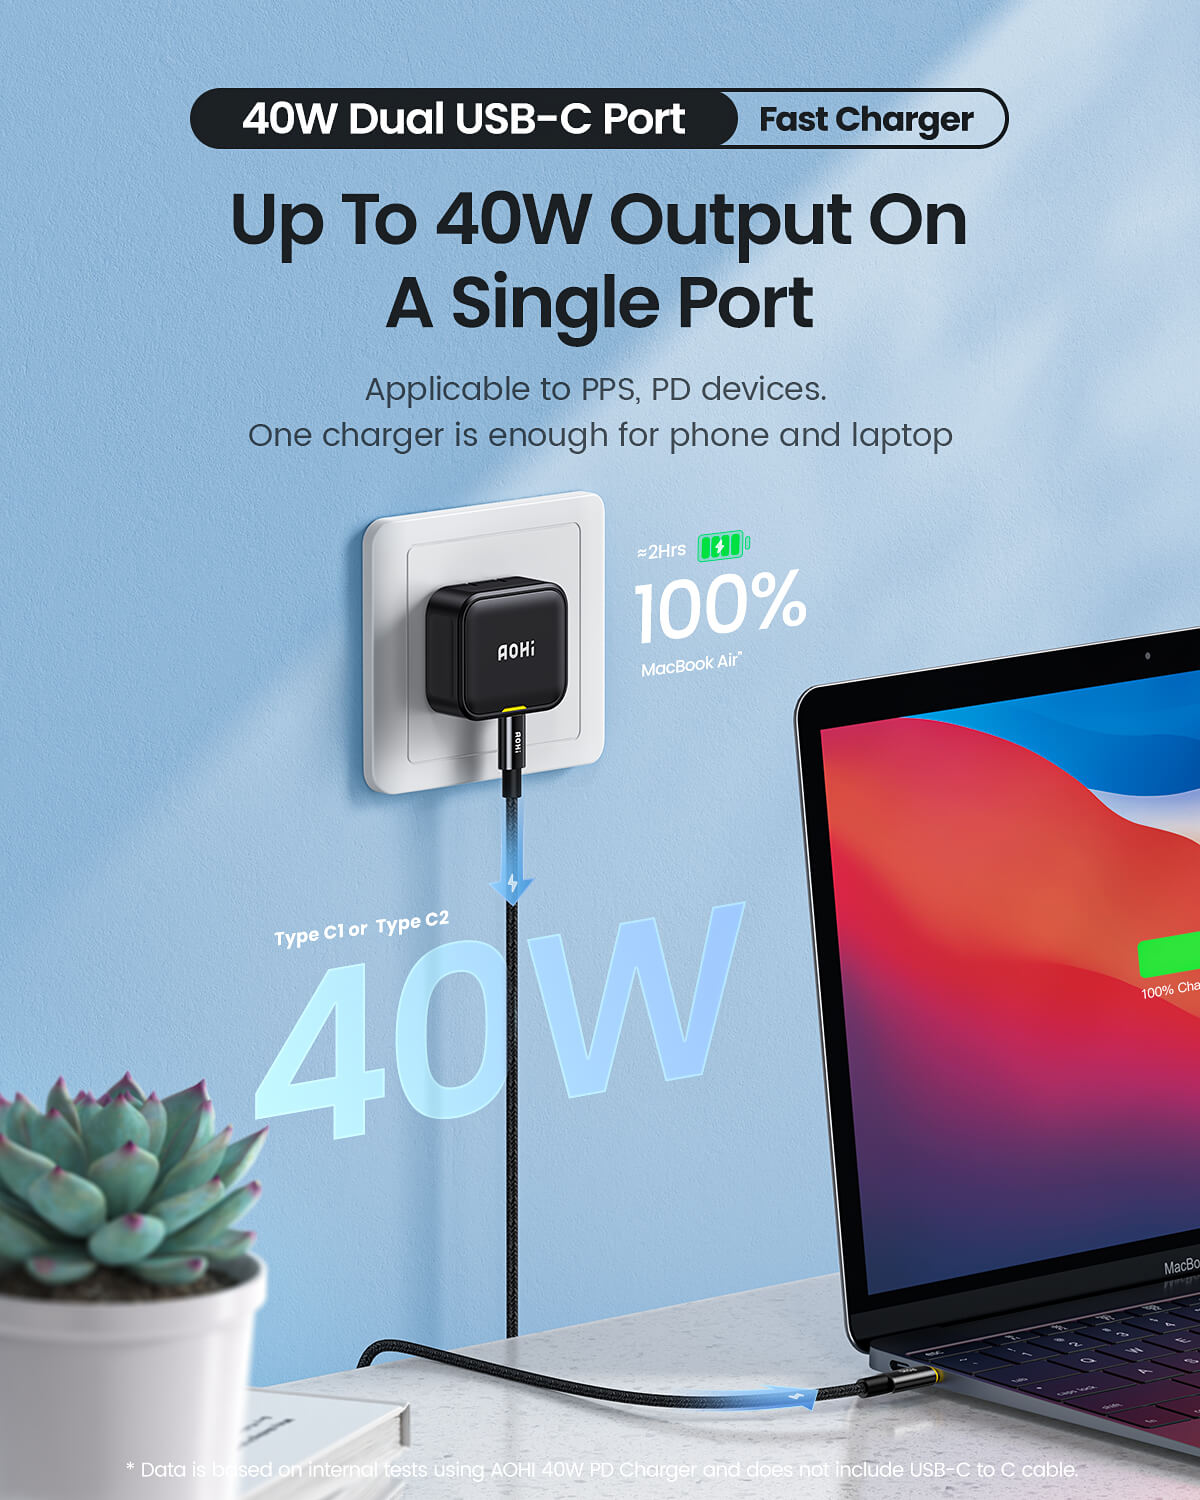 AOHI MAGCUBE 40W FOLDABLE DUAL-PORT PD CHARGER